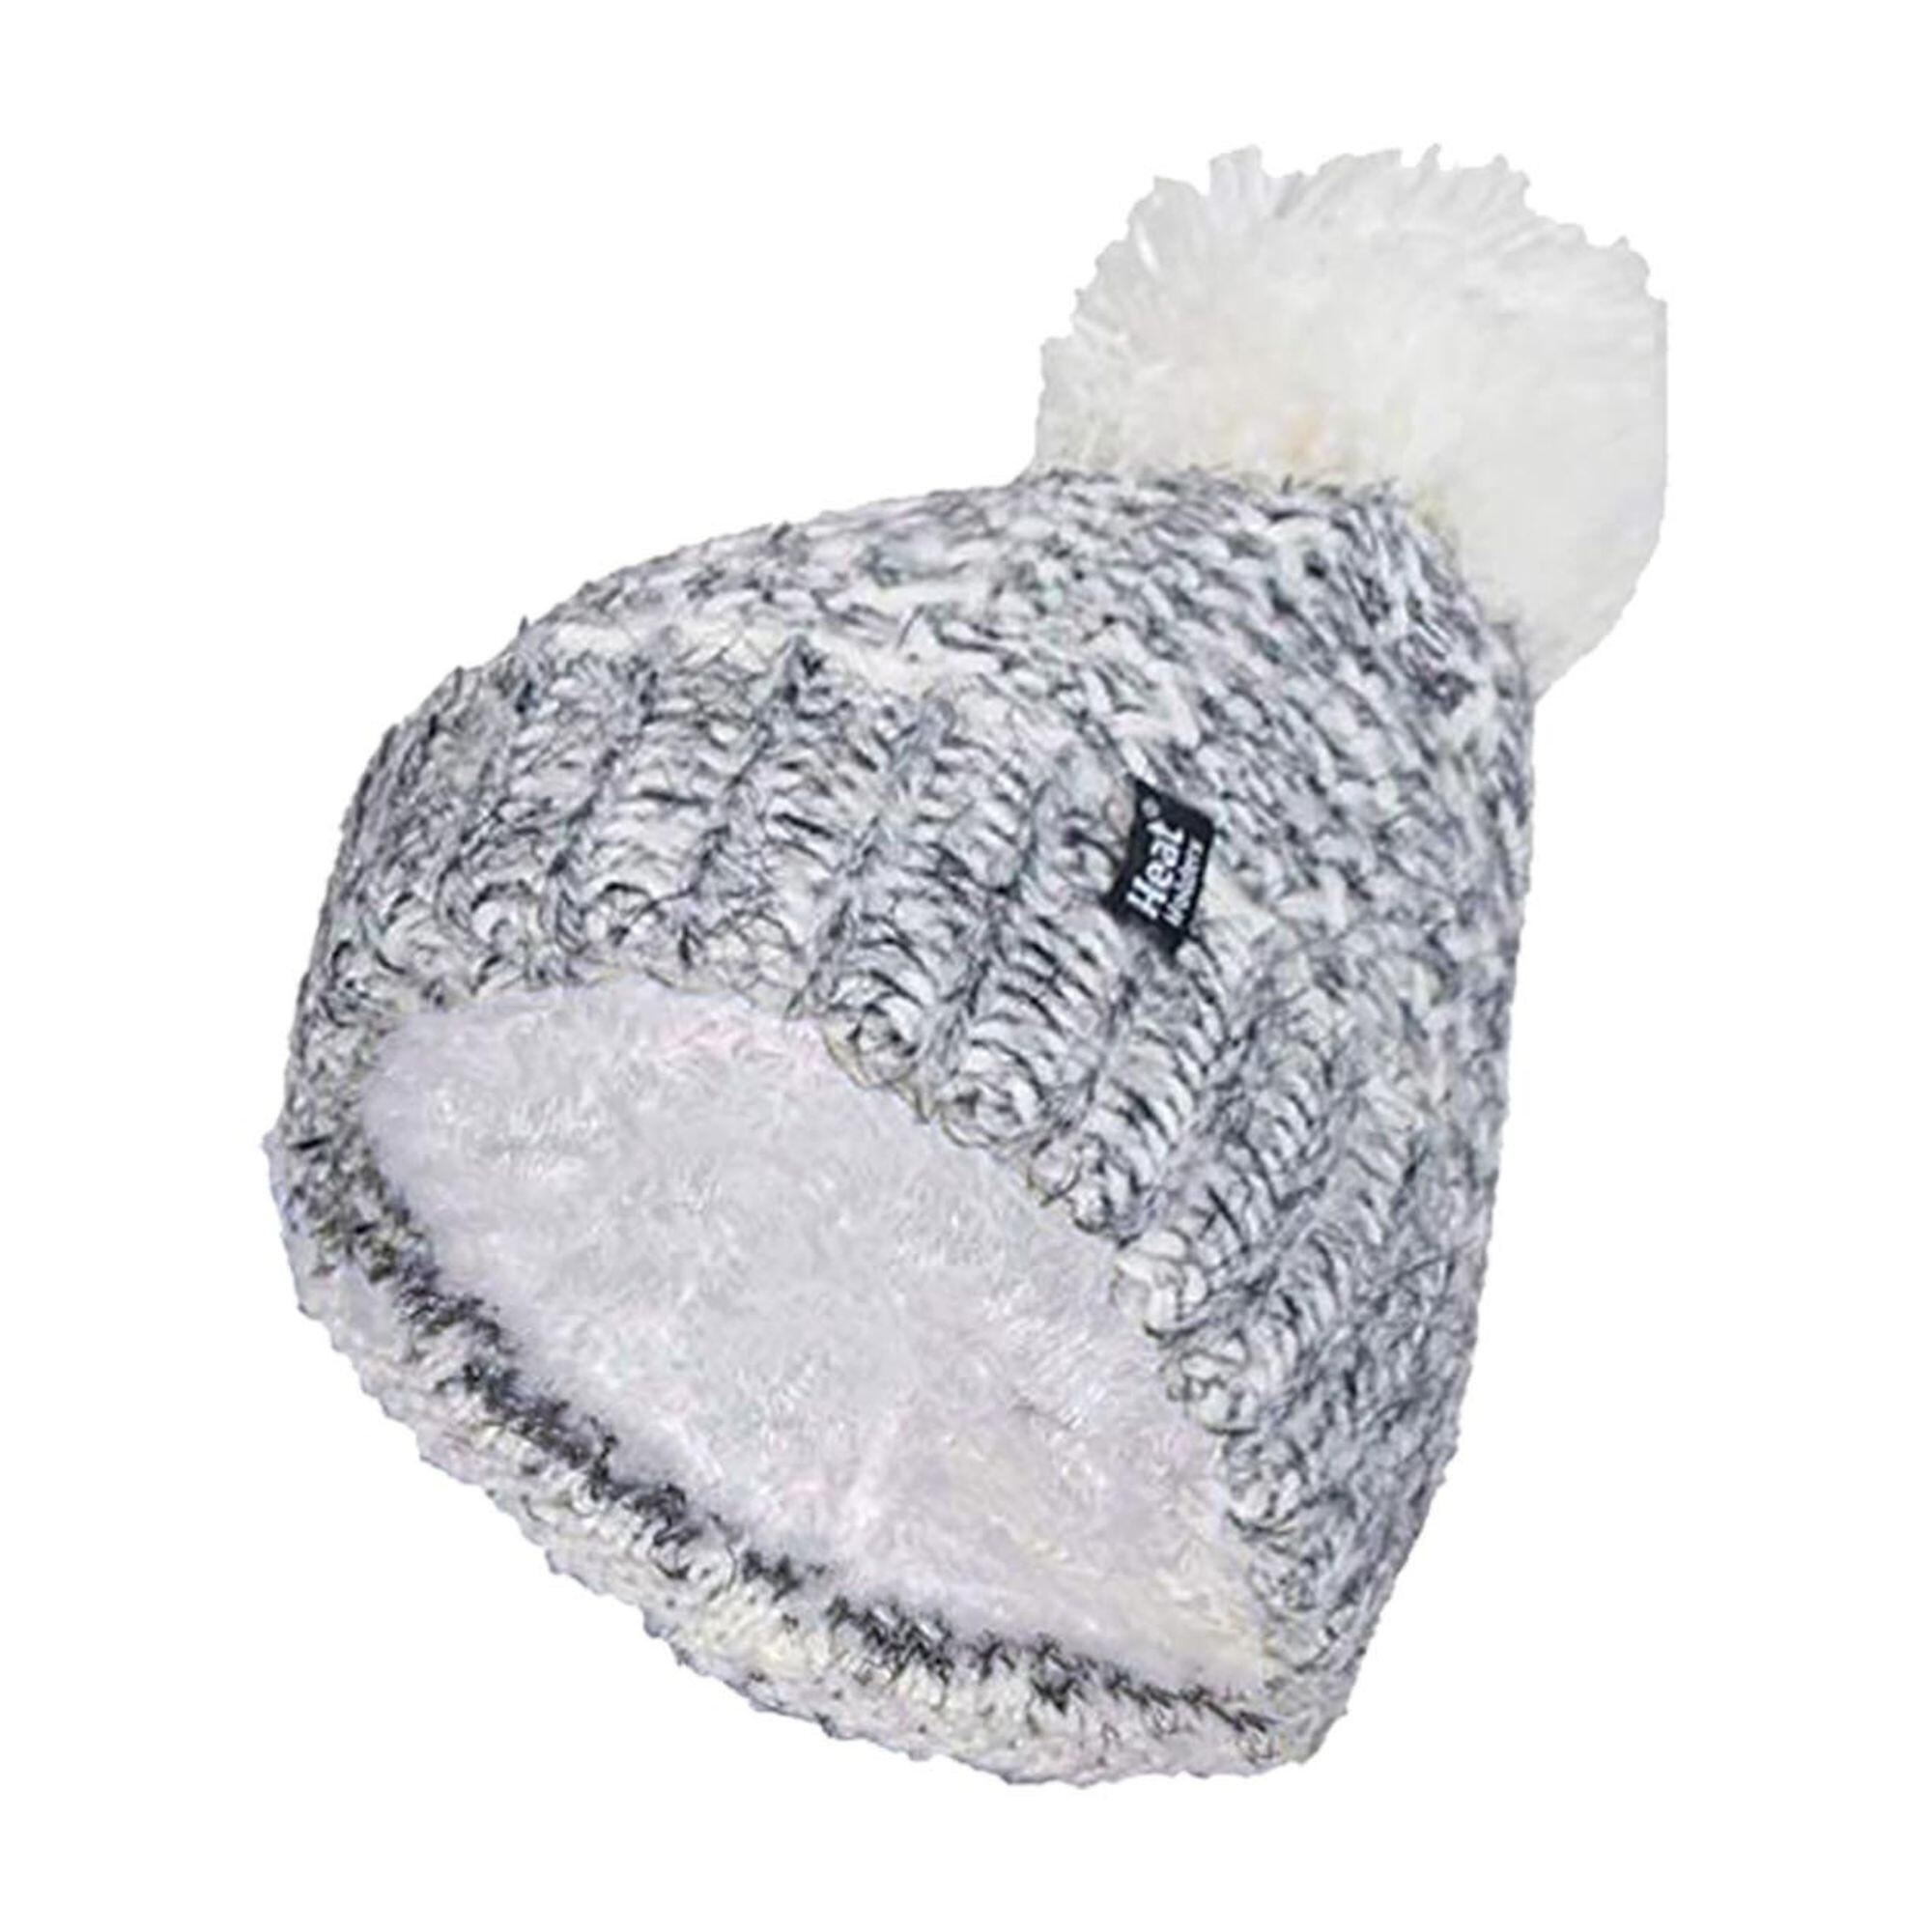 Ladies Fleece Lined Cuffed Thermal Winter Bobble Hat with Pom Pom 1/4